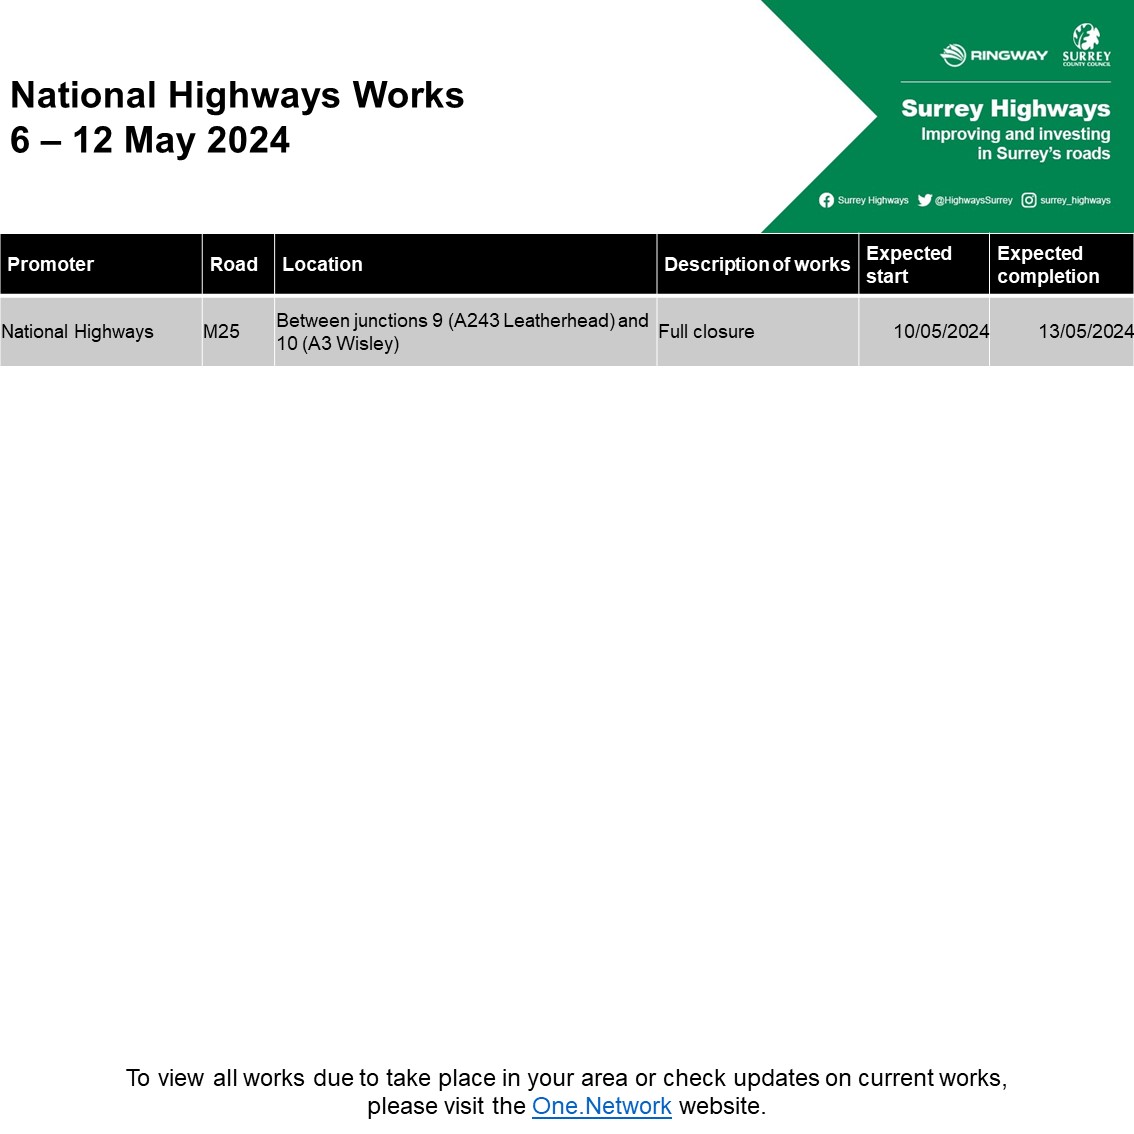 🚦Guildford planned roadworks 🗓️ Week commencing 6/5/24 #Guildford #Normandy #Ash #AshVale #Tongham #WestClandon #Peasmarsh #Puttenham #Ripley #Send #Effingham #Compton @GuildfordBC For more see orlo.uk/OHCii Please be aware of an upcoming M25 closure (J9 and J10)